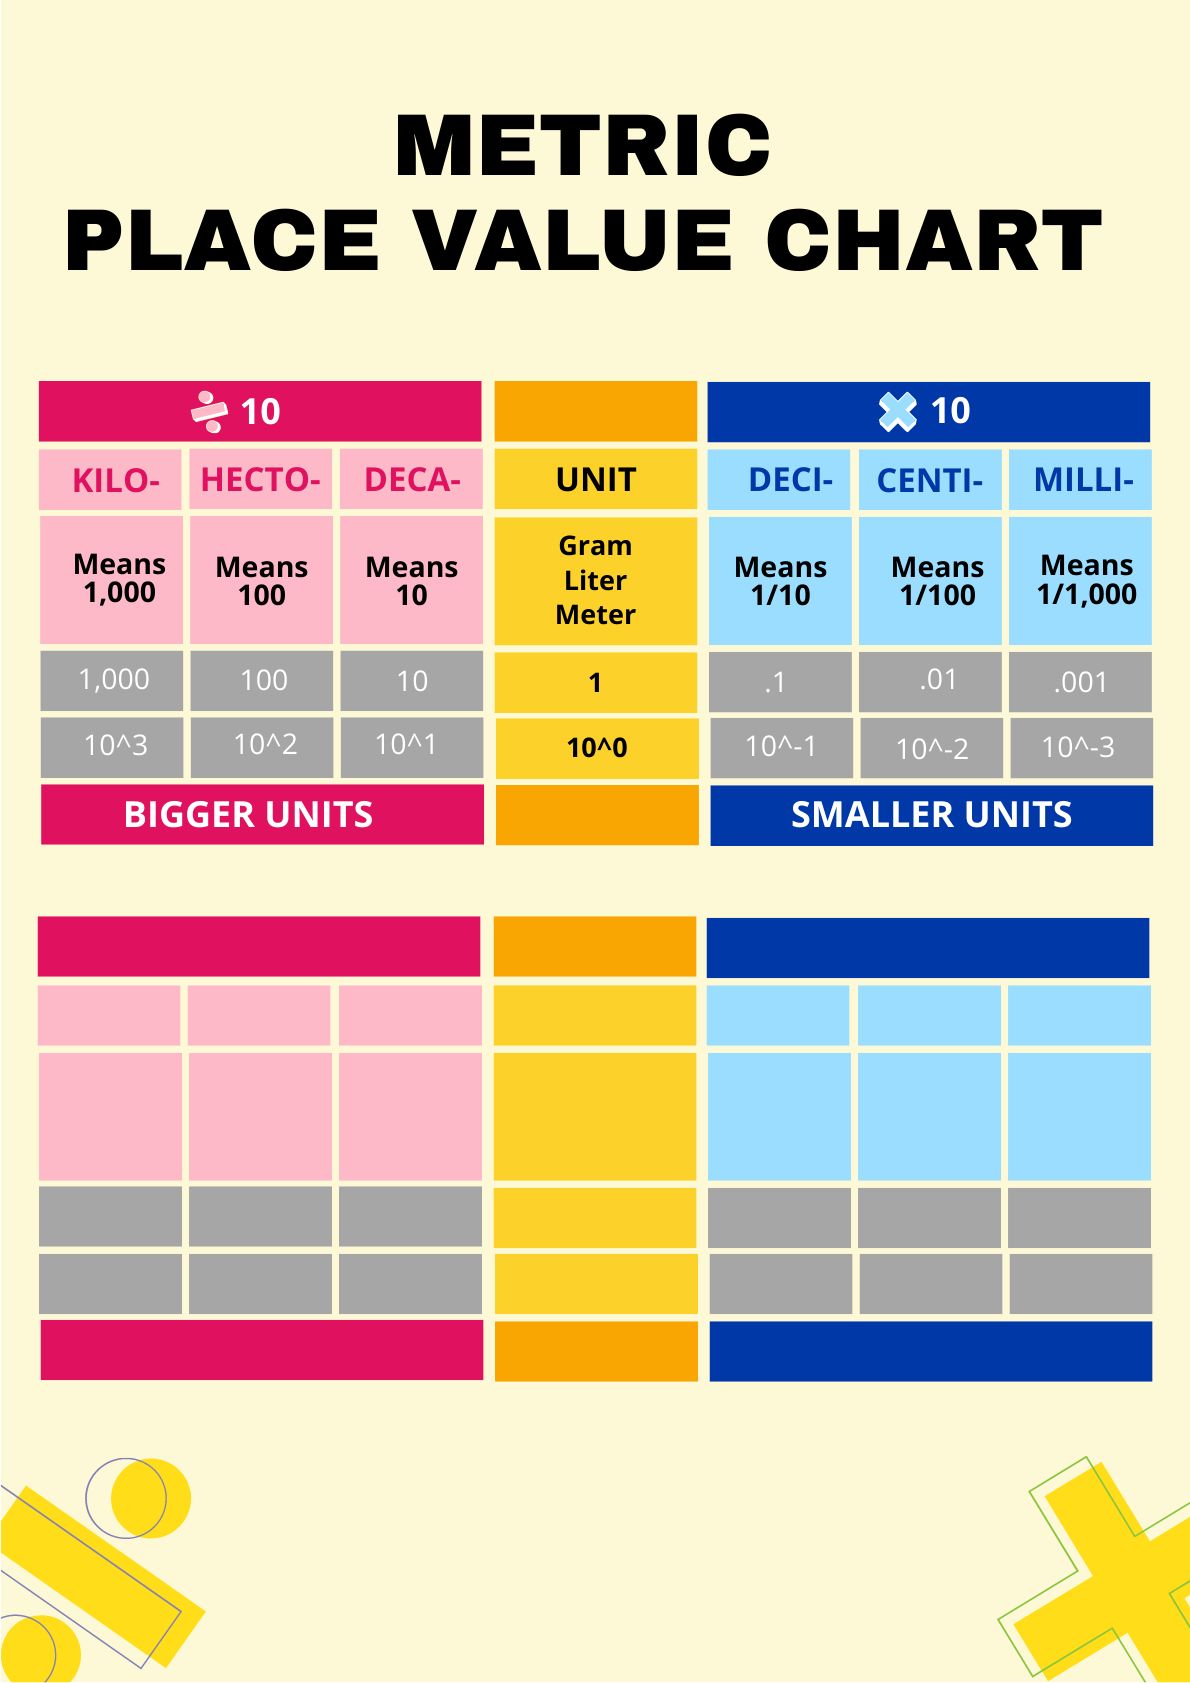 Metric Place Value Chart in PDF, Illustrator